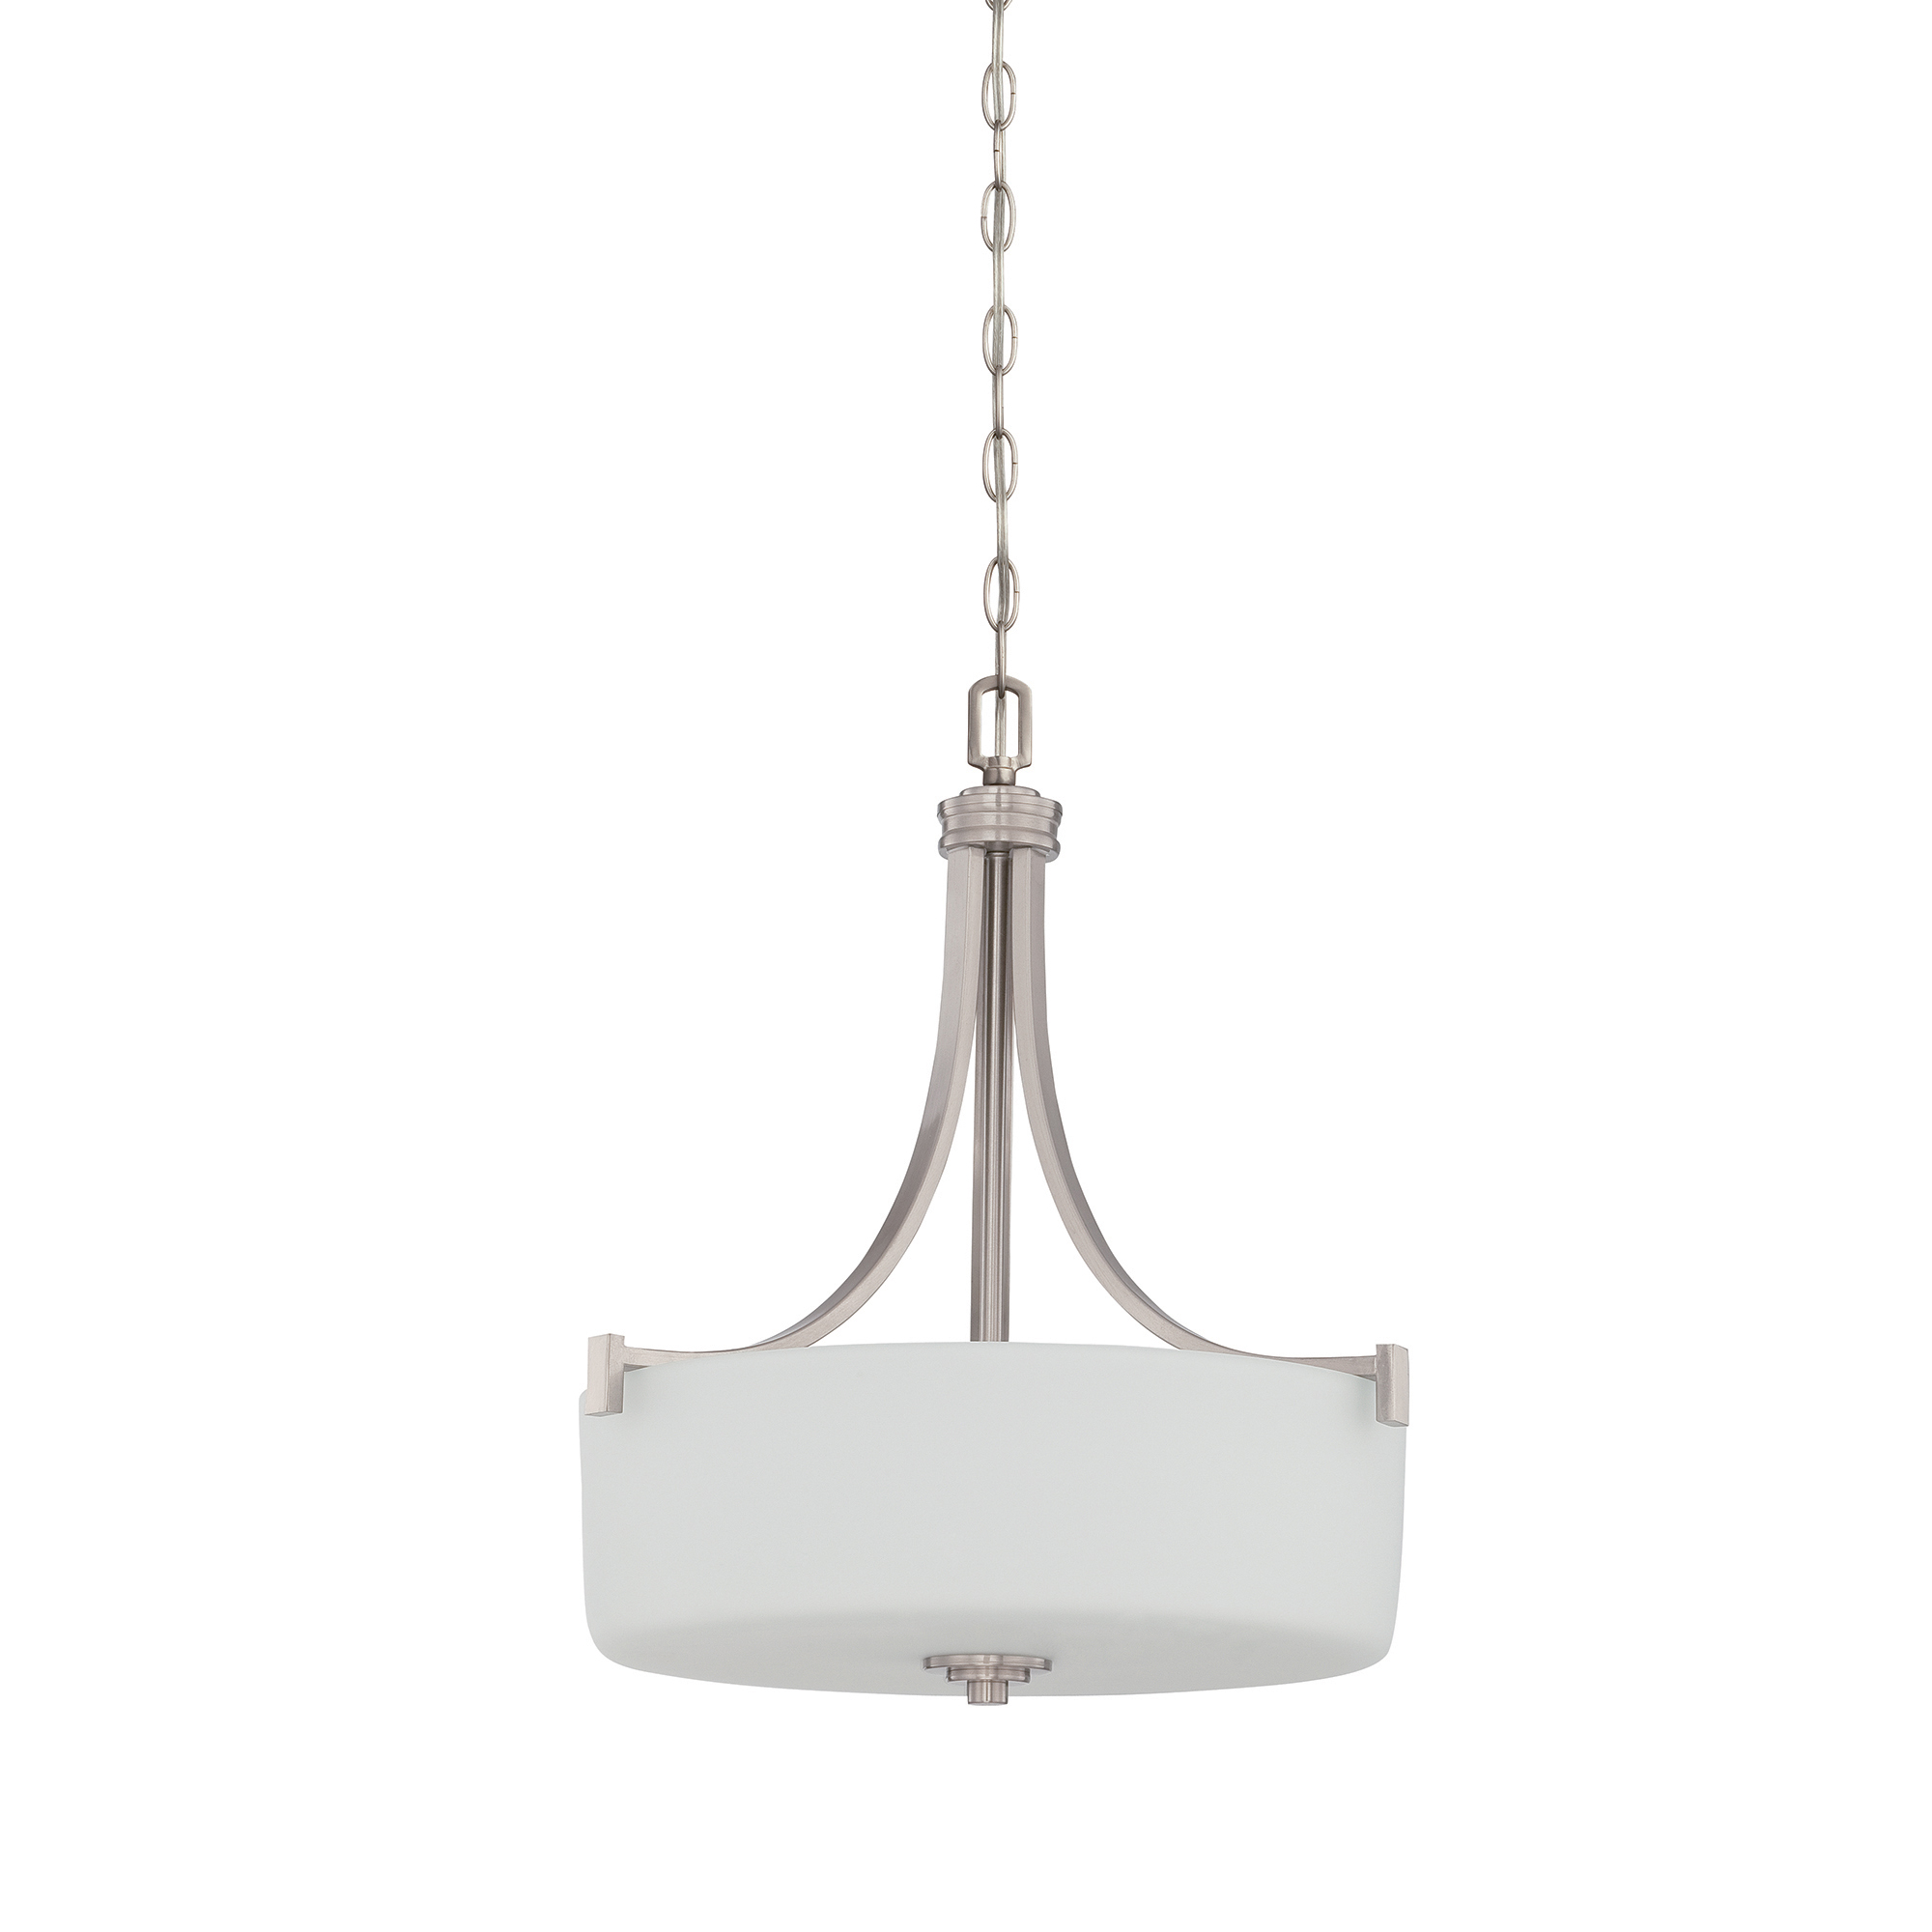 Sunset Lighting Dalton Three Light Pendant - Opal Etched Glass, Dimmable - With Bright Satin Nickel Finish